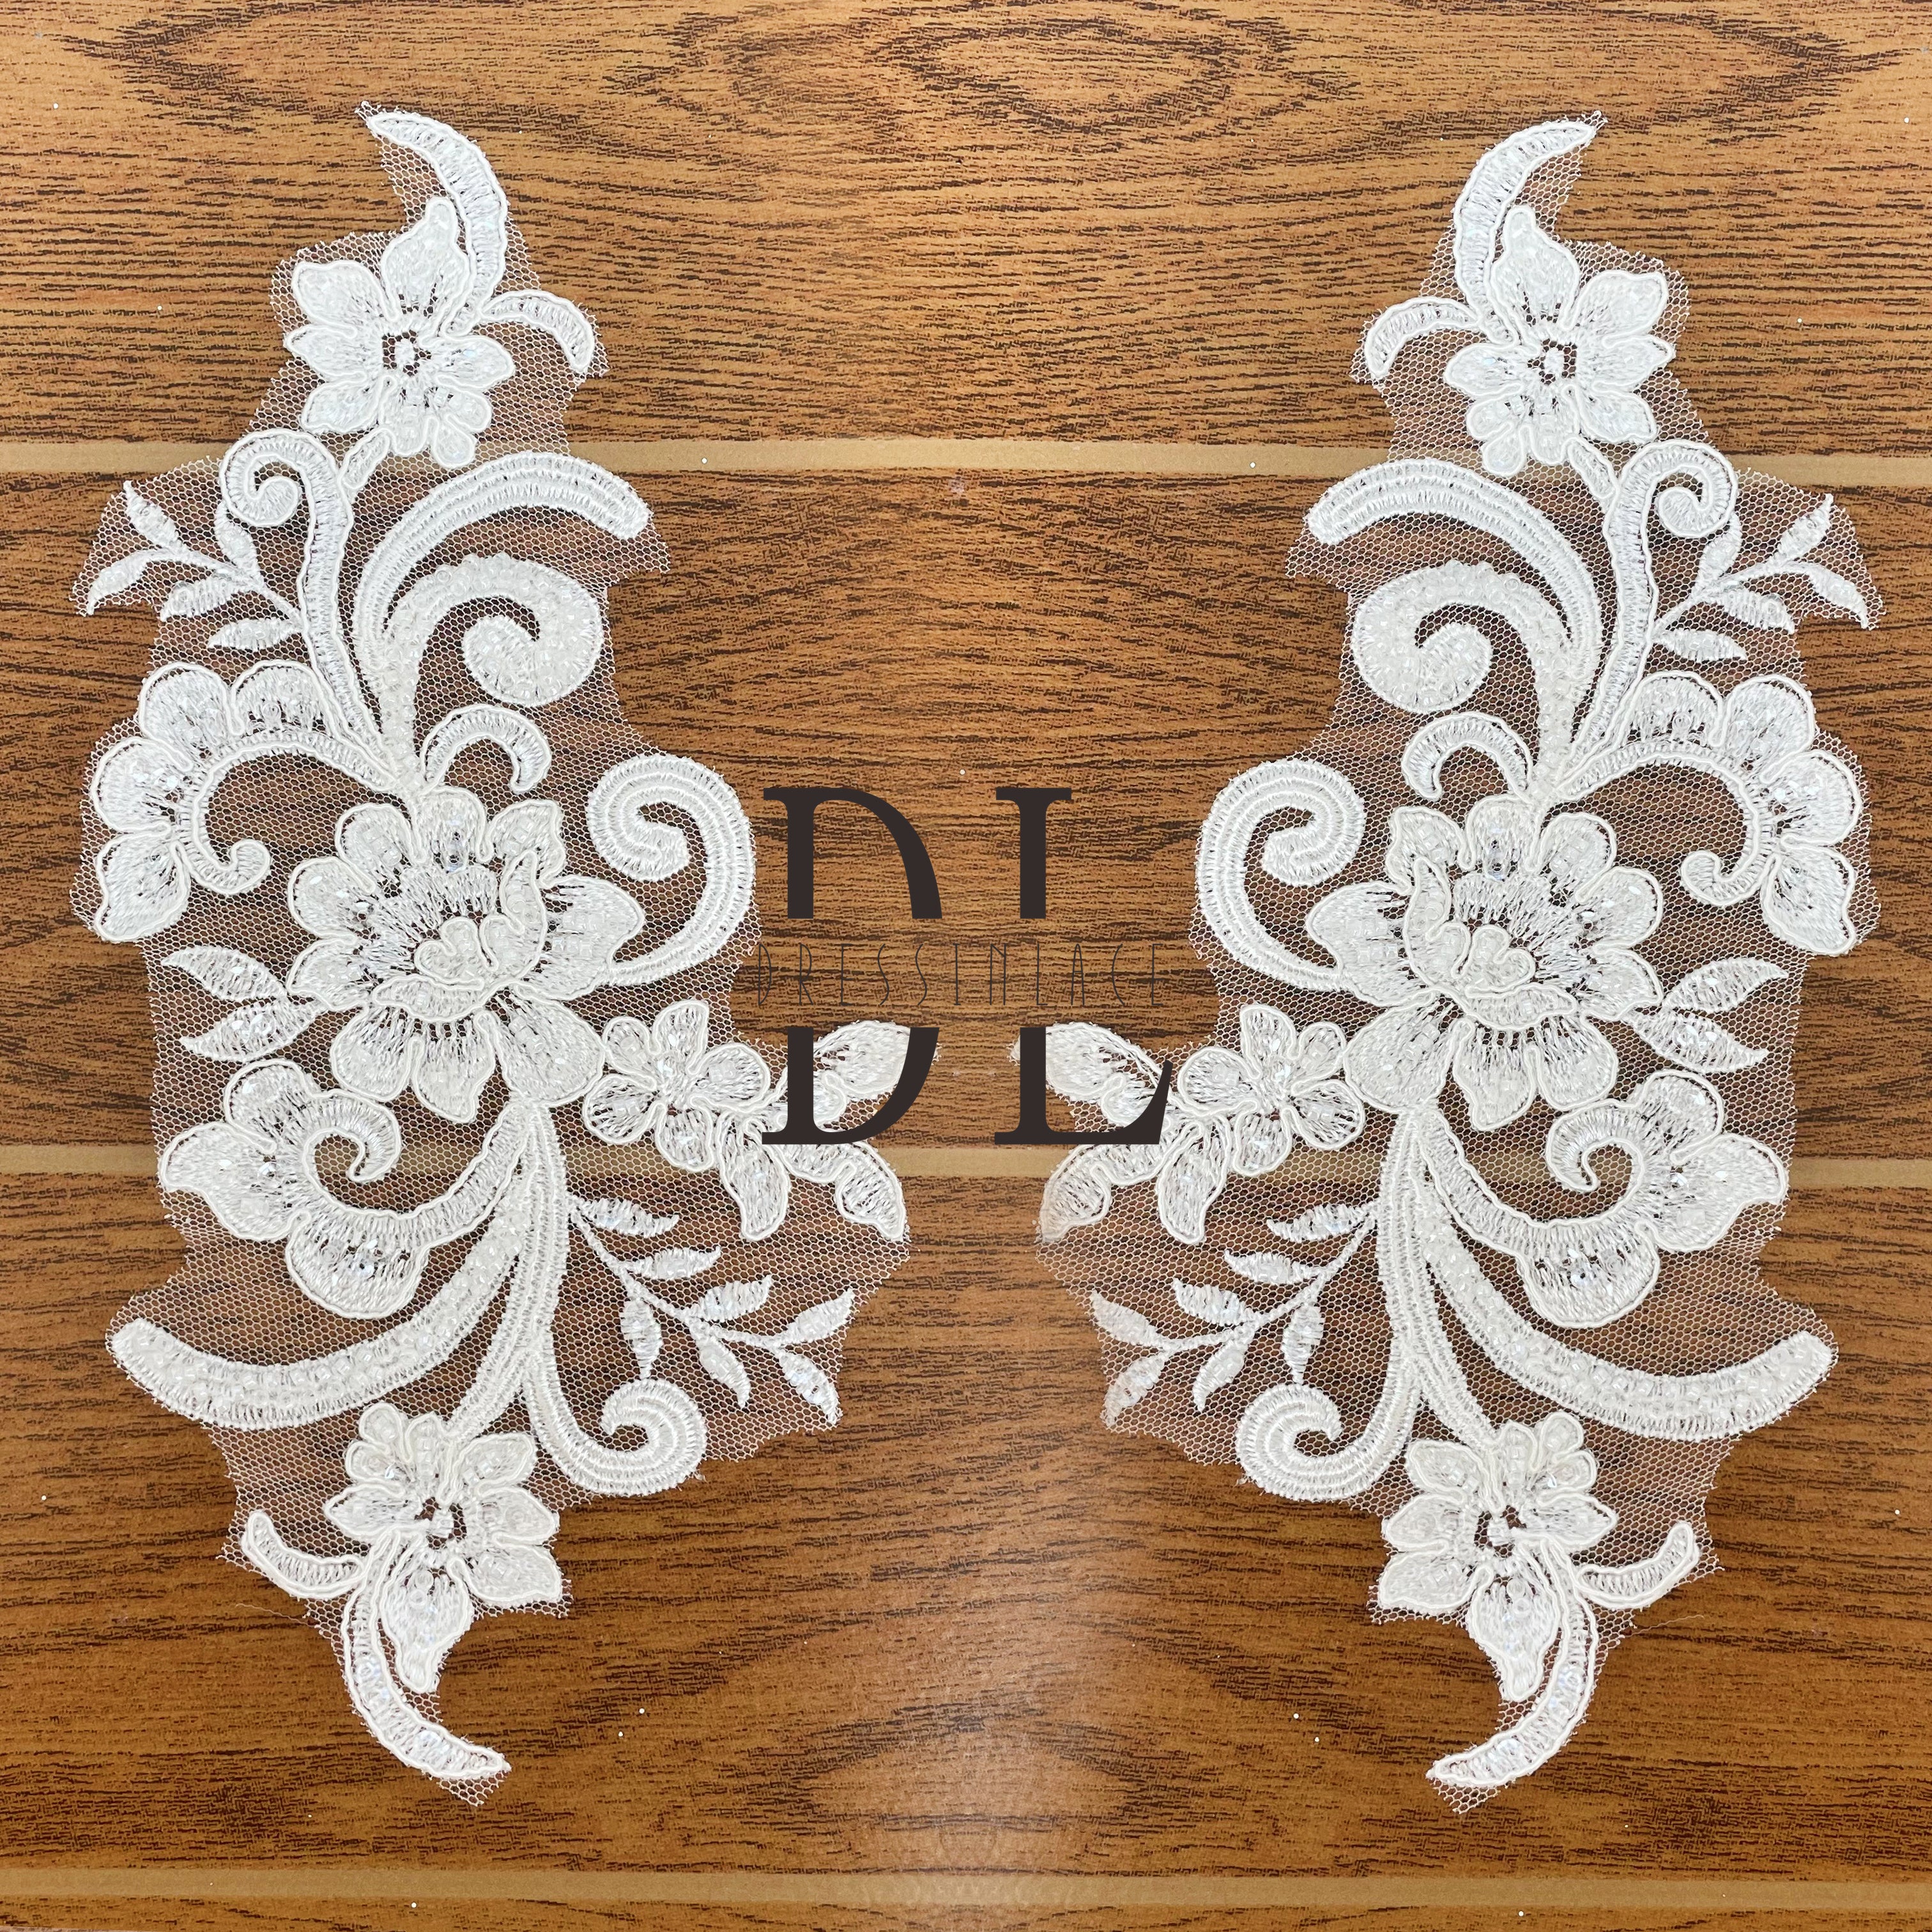 Corded Floral Applique on Mesh - Pairs